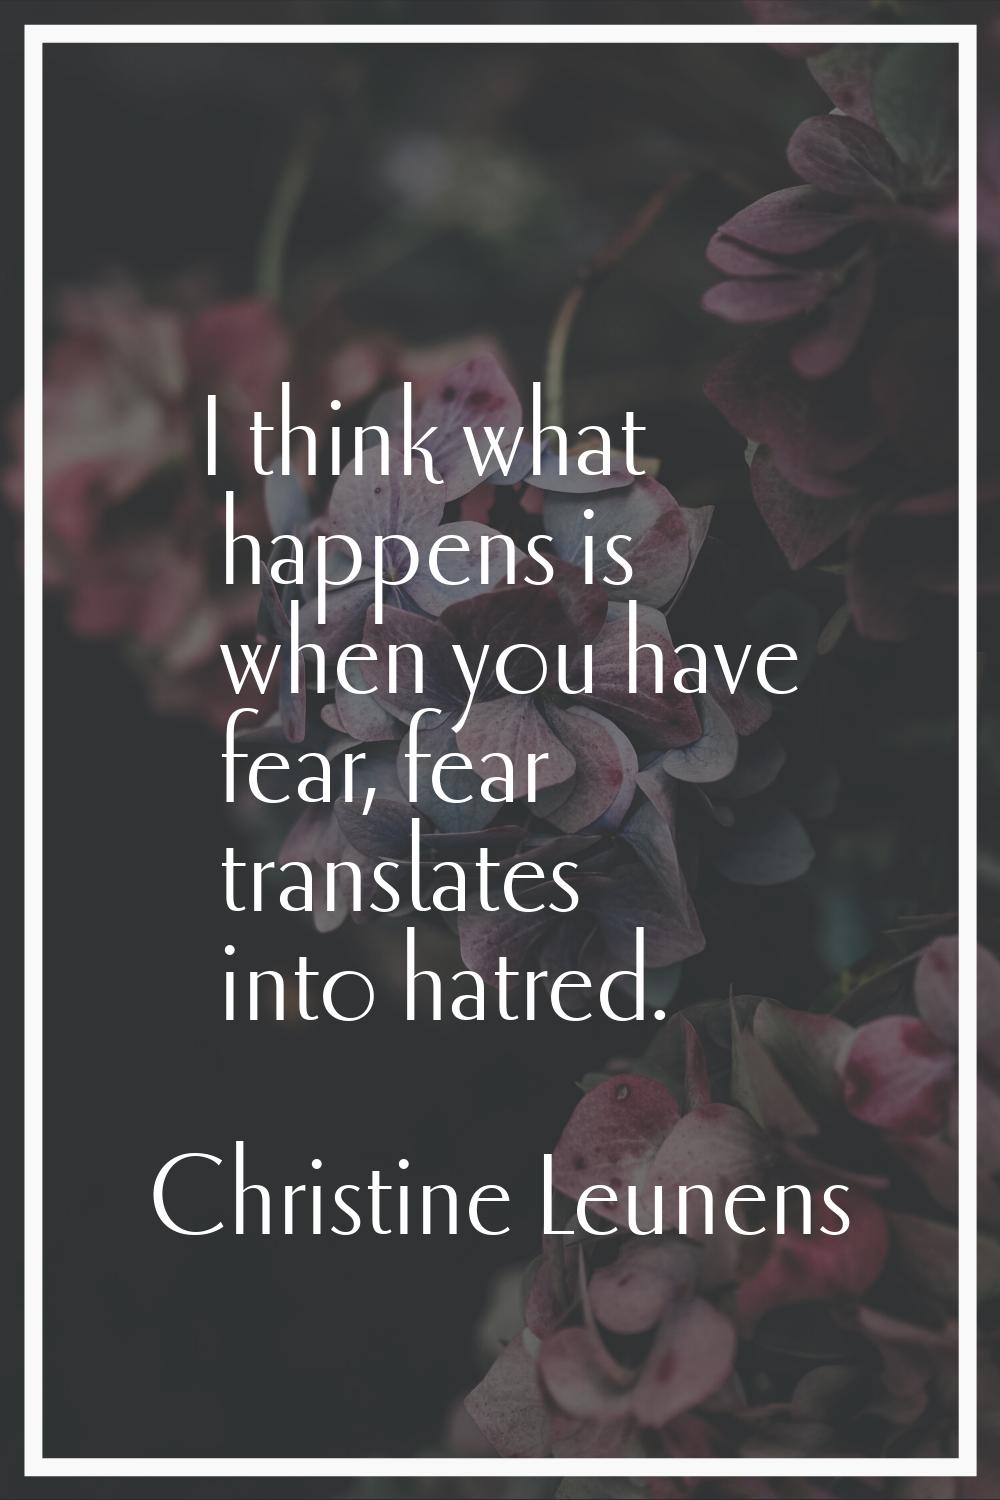 I think what happens is when you have fear, fear translates into hatred.